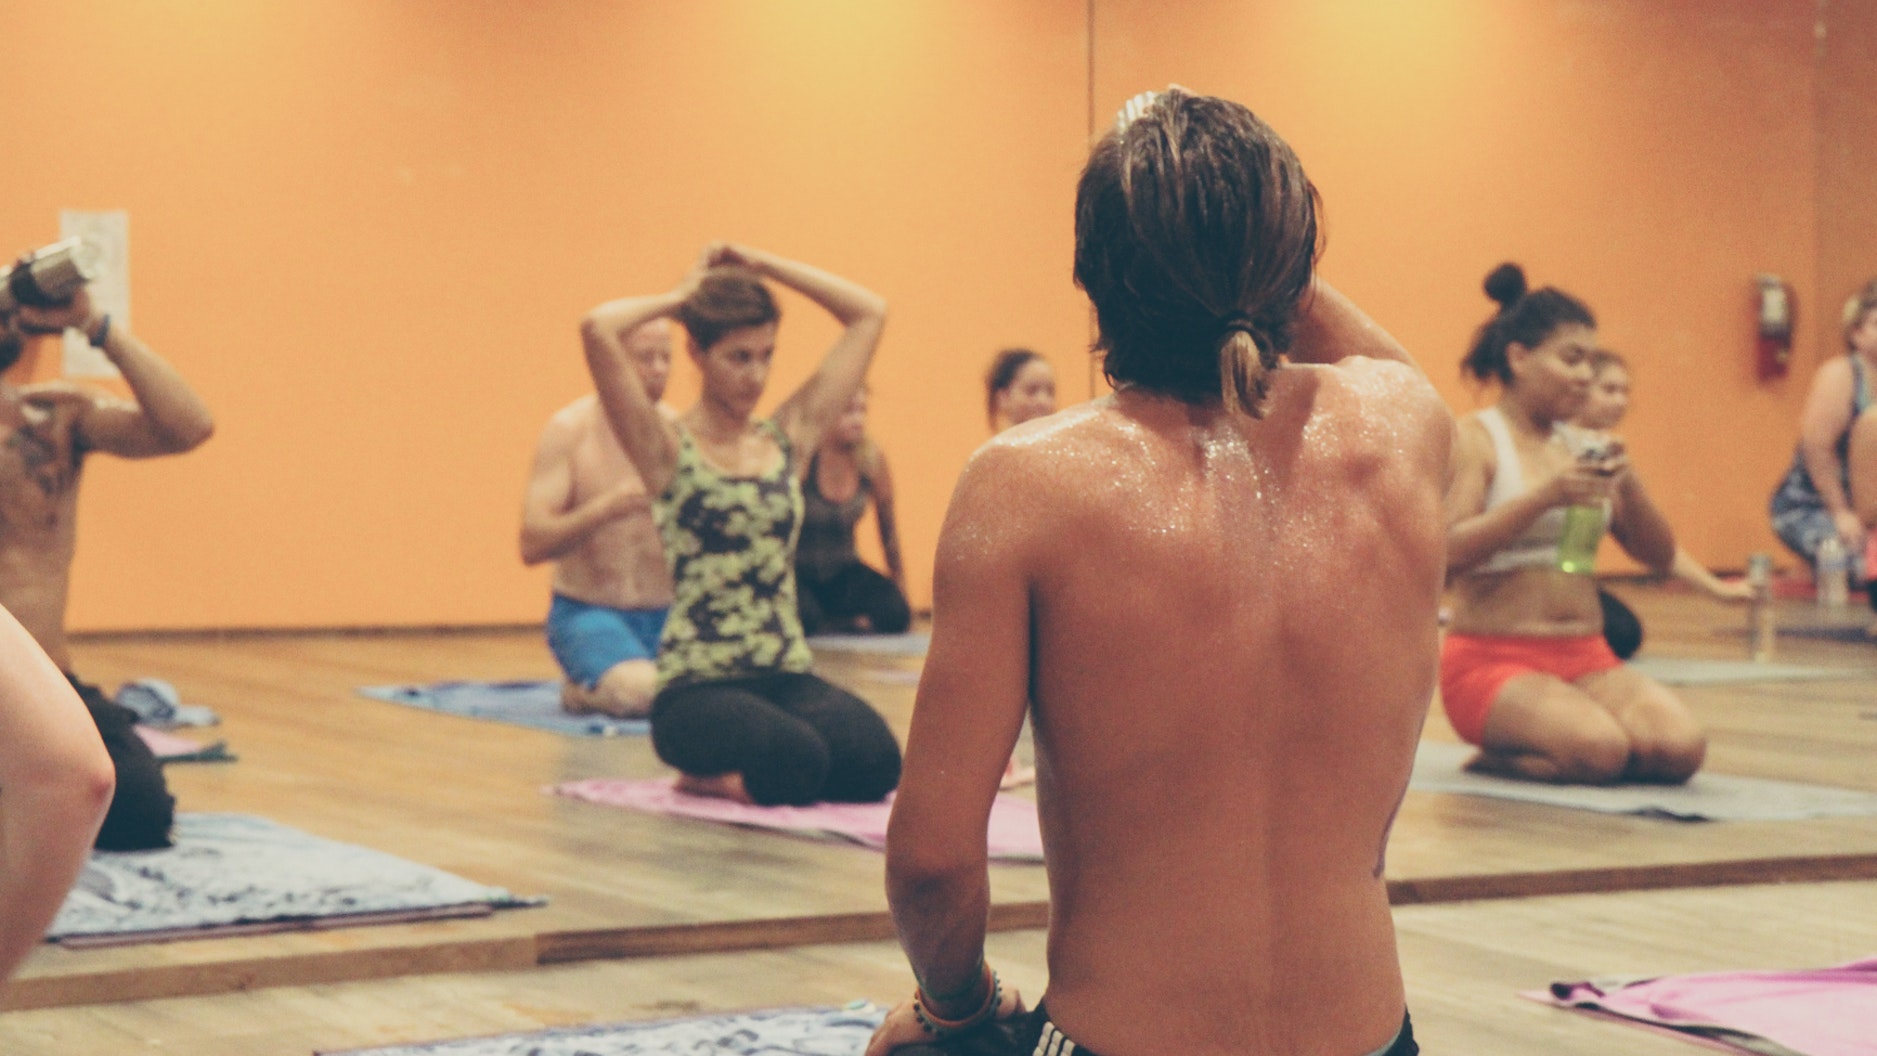 Is Hot Yoga Better for You Than Regular? Science Suggests Not